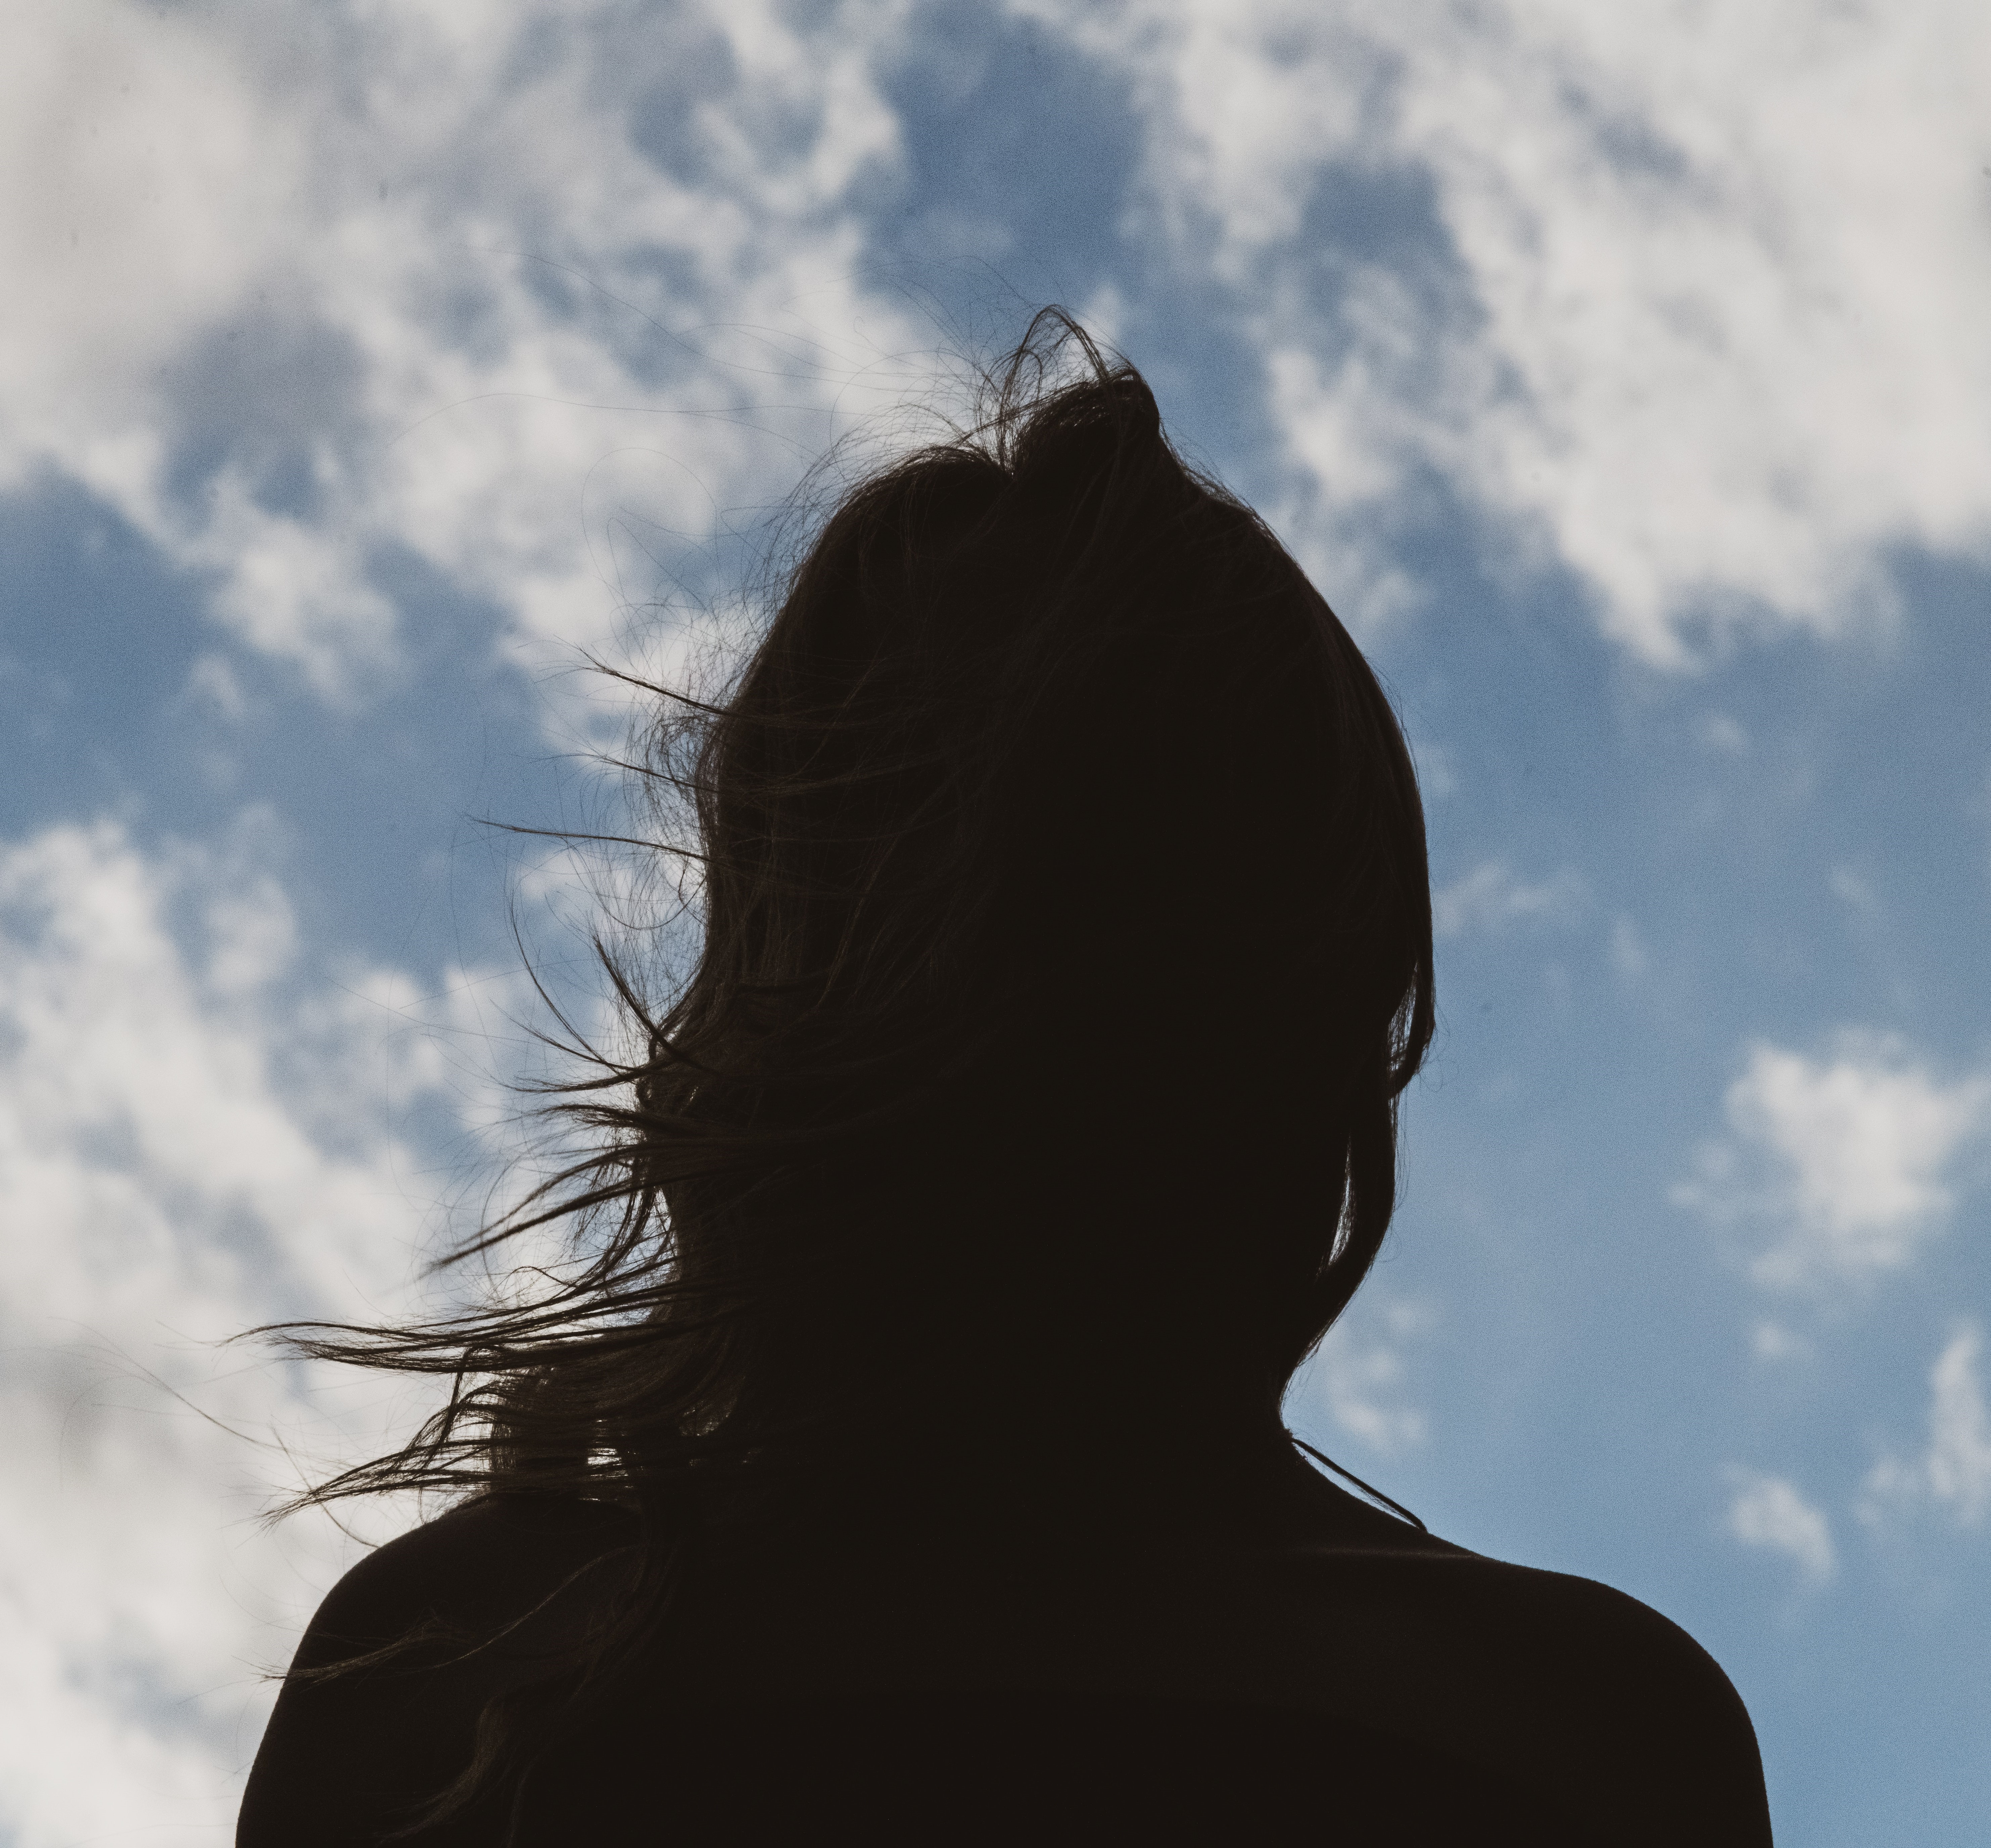 Silhouette of a person with long hair looking at a blue sky with clouds